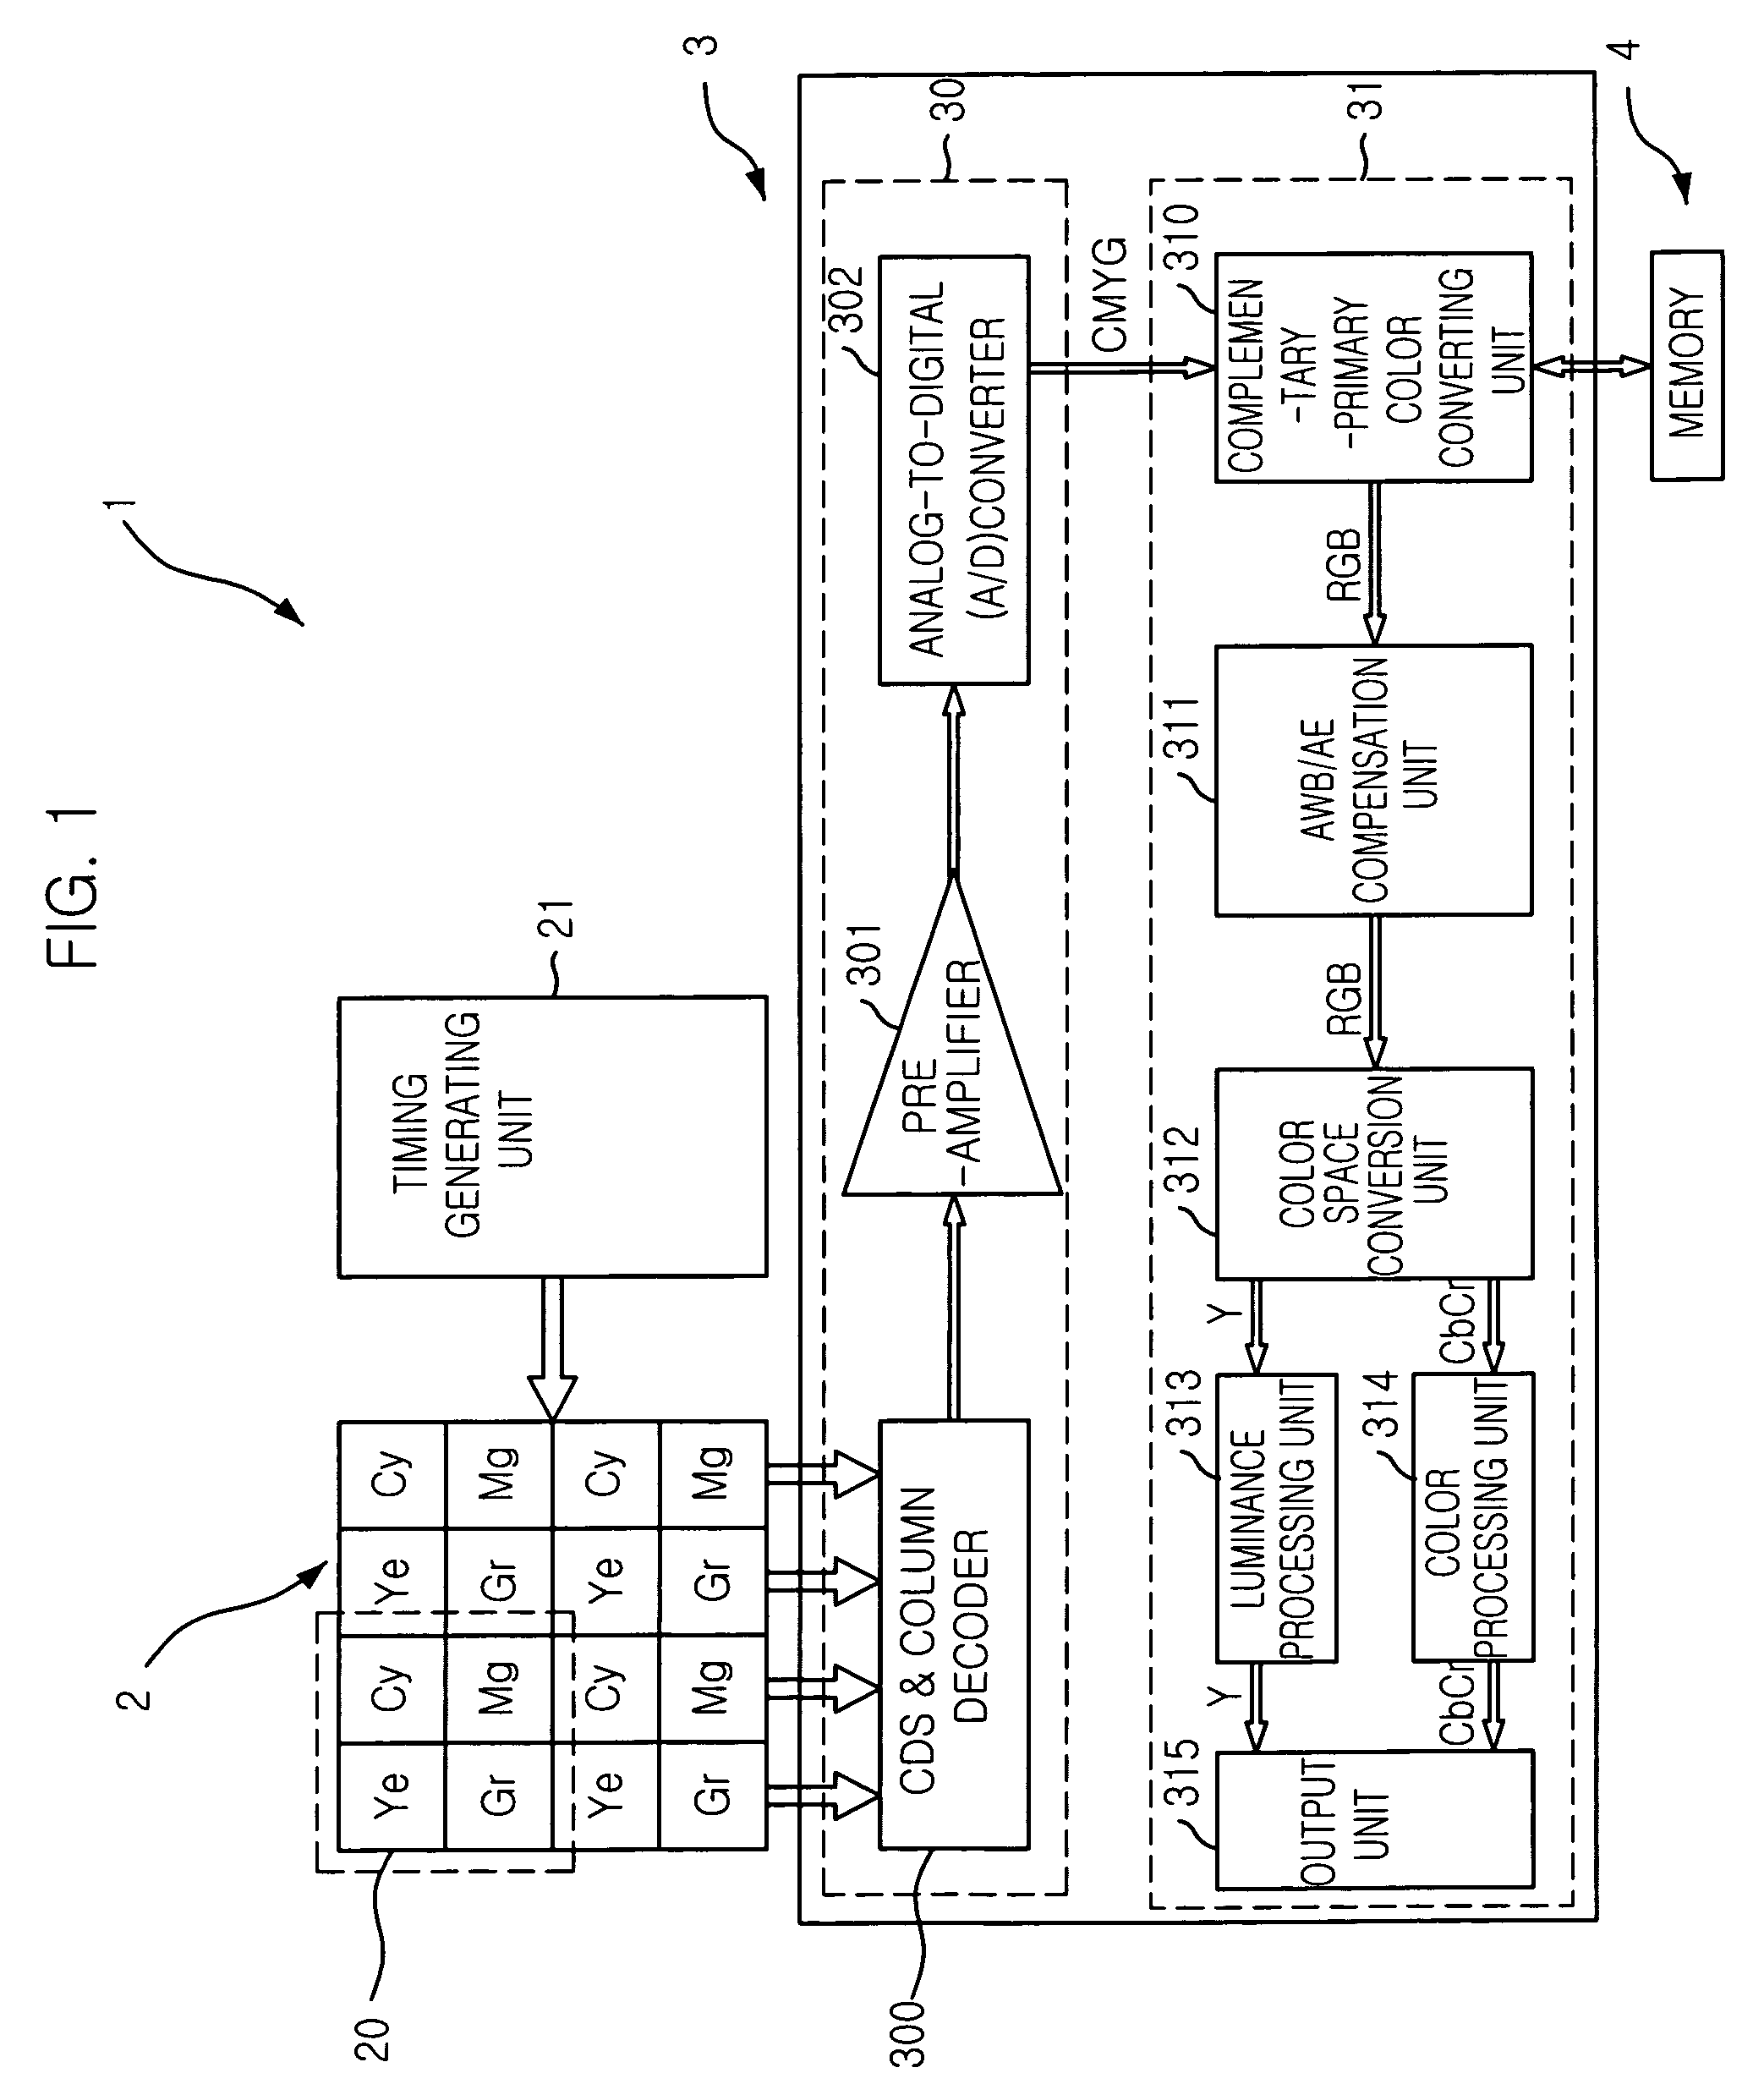 System on a chip camera system employing complementary color filter